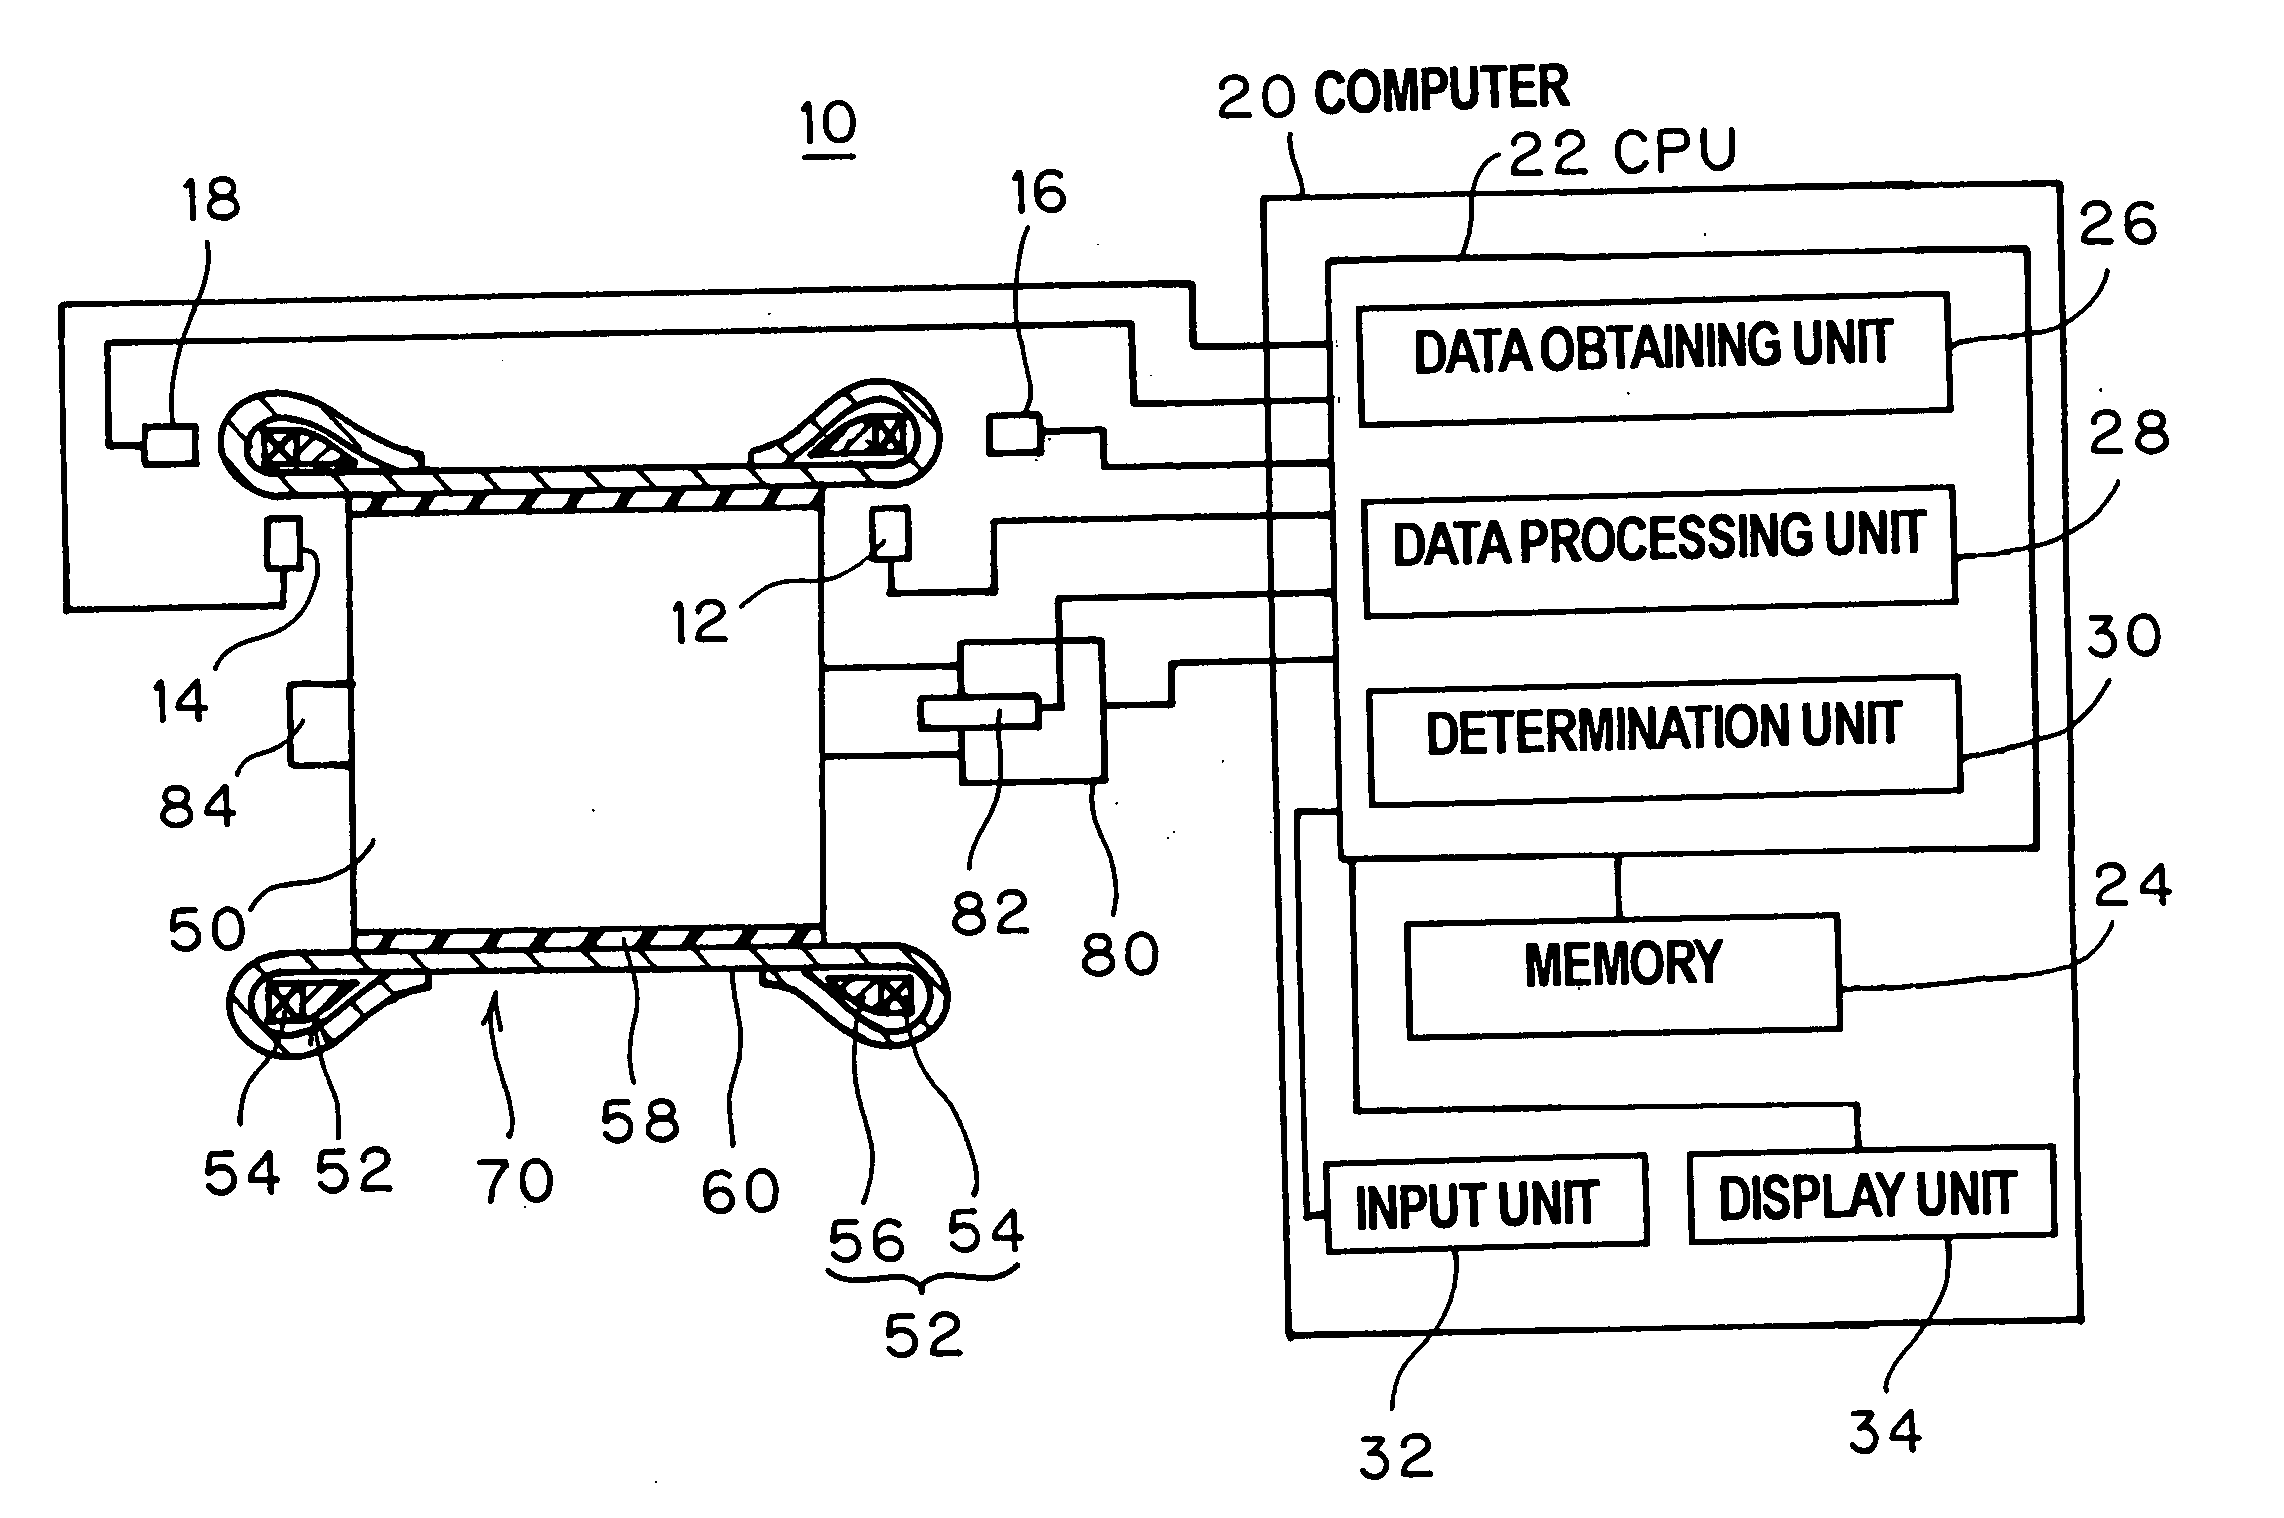 Method and apparatus for inspecting pneumatic tire during production